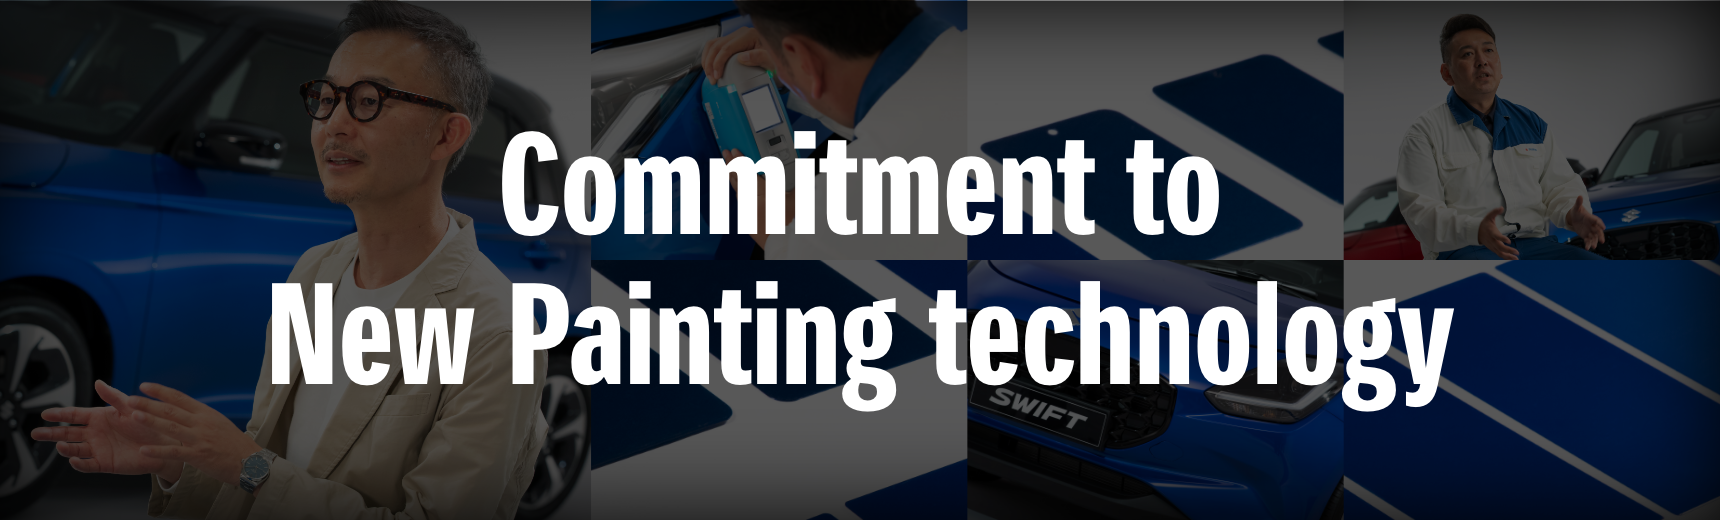 Commitment to New Painting technology